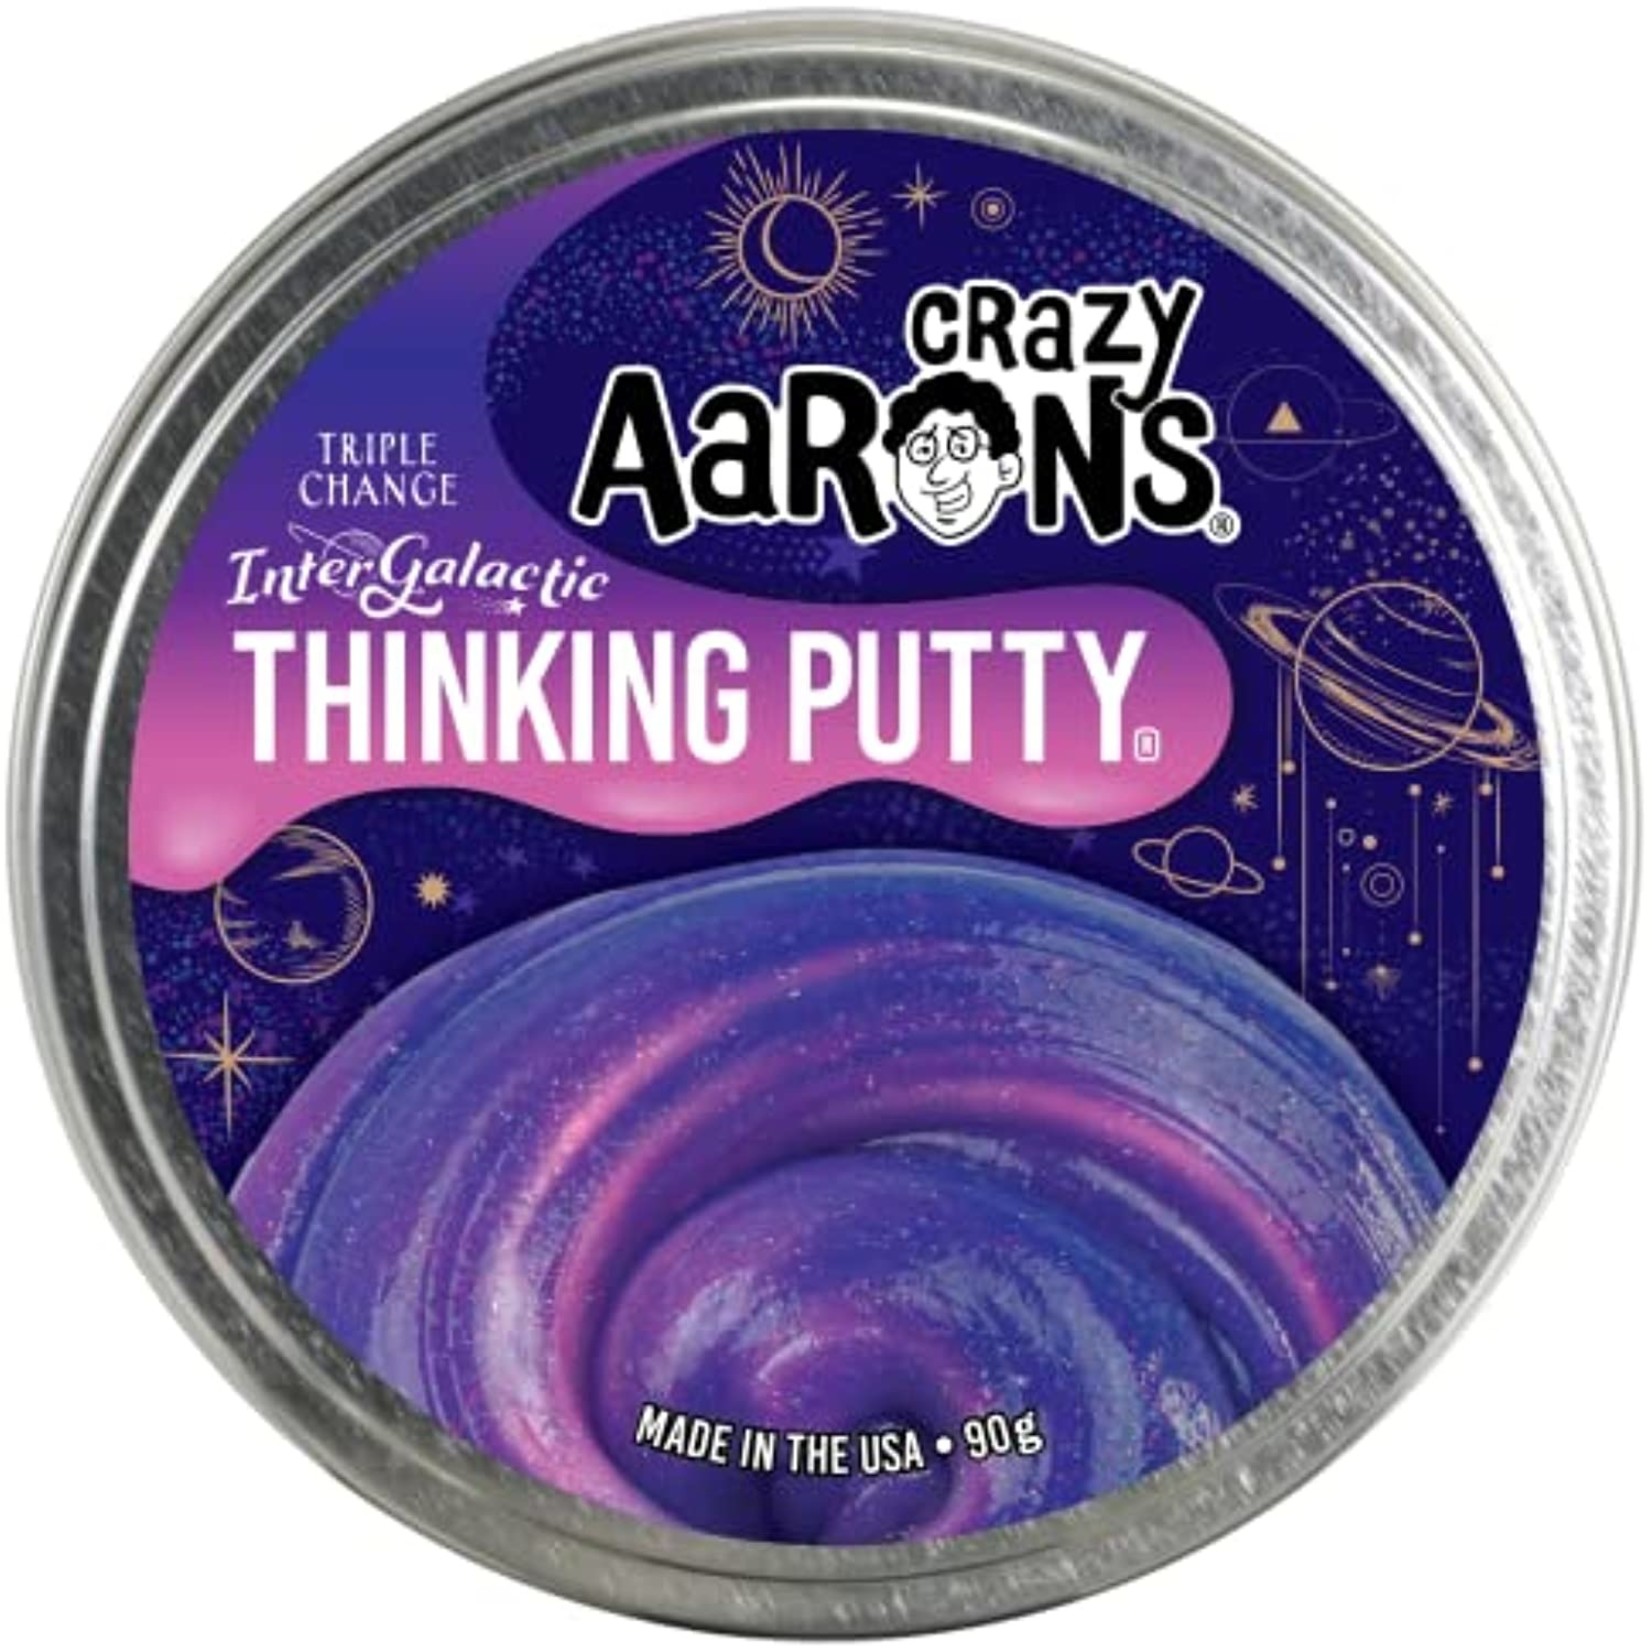 Crazy Aaron's Crazy Aaron's Intergalactic - Full Size 4" Thinking Putty Tin